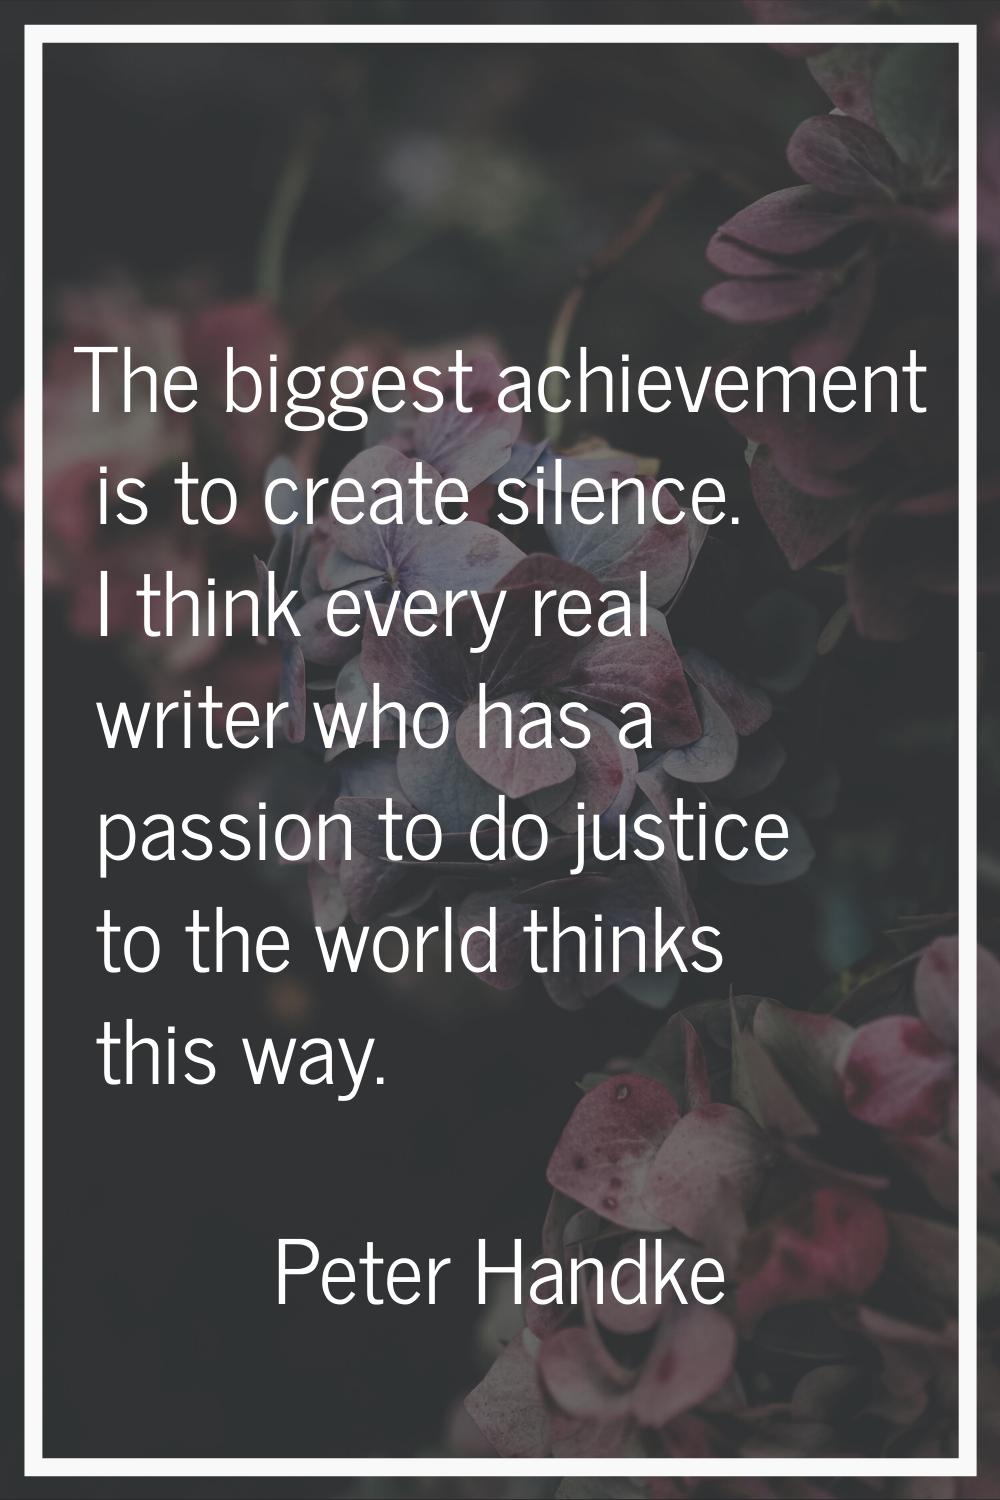 The biggest achievement is to create silence. I think every real writer who has a passion to do jus